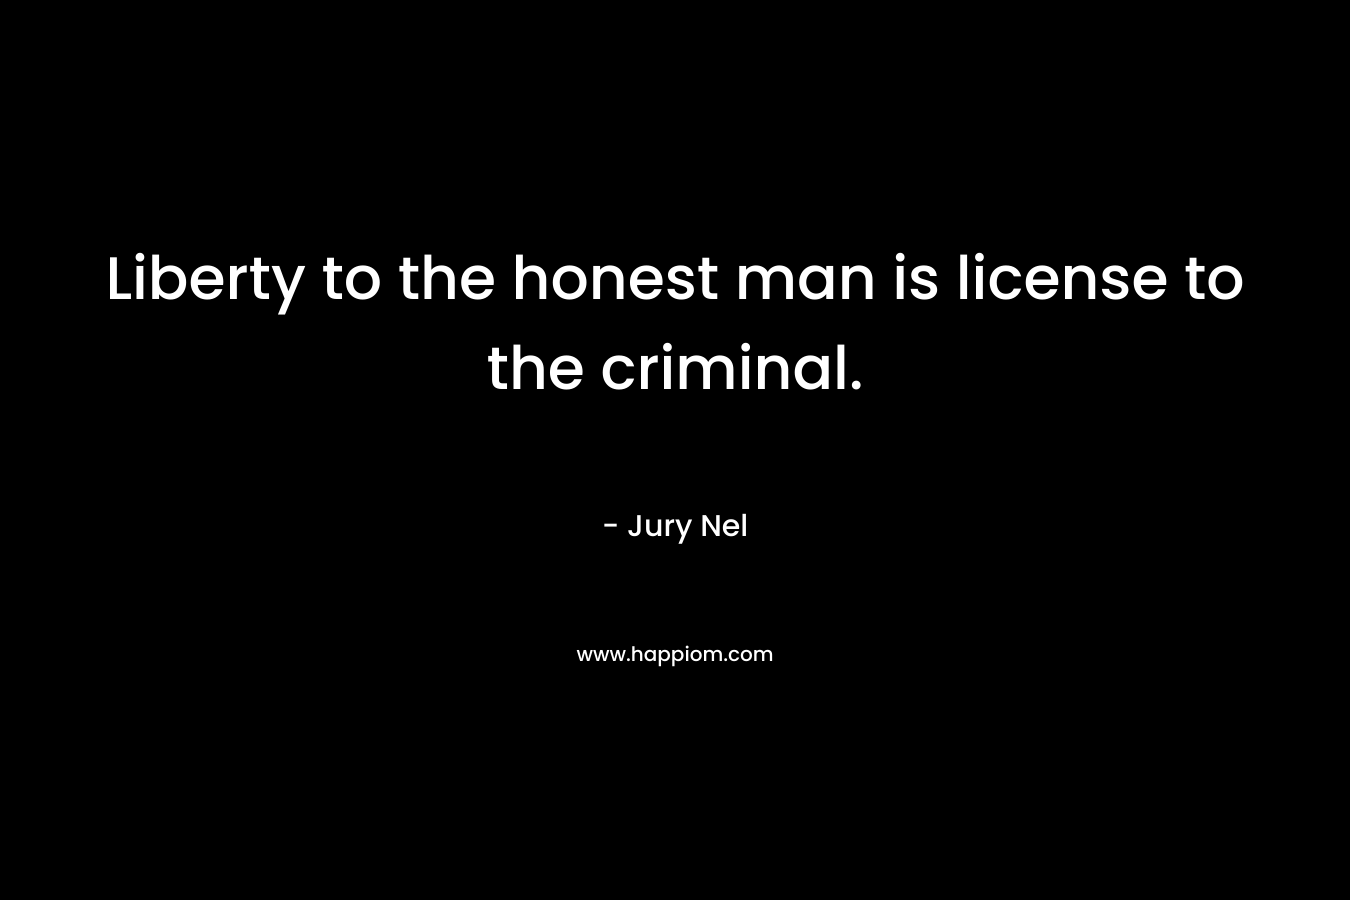 Liberty to the honest man is license to the criminal. – Jury Nel